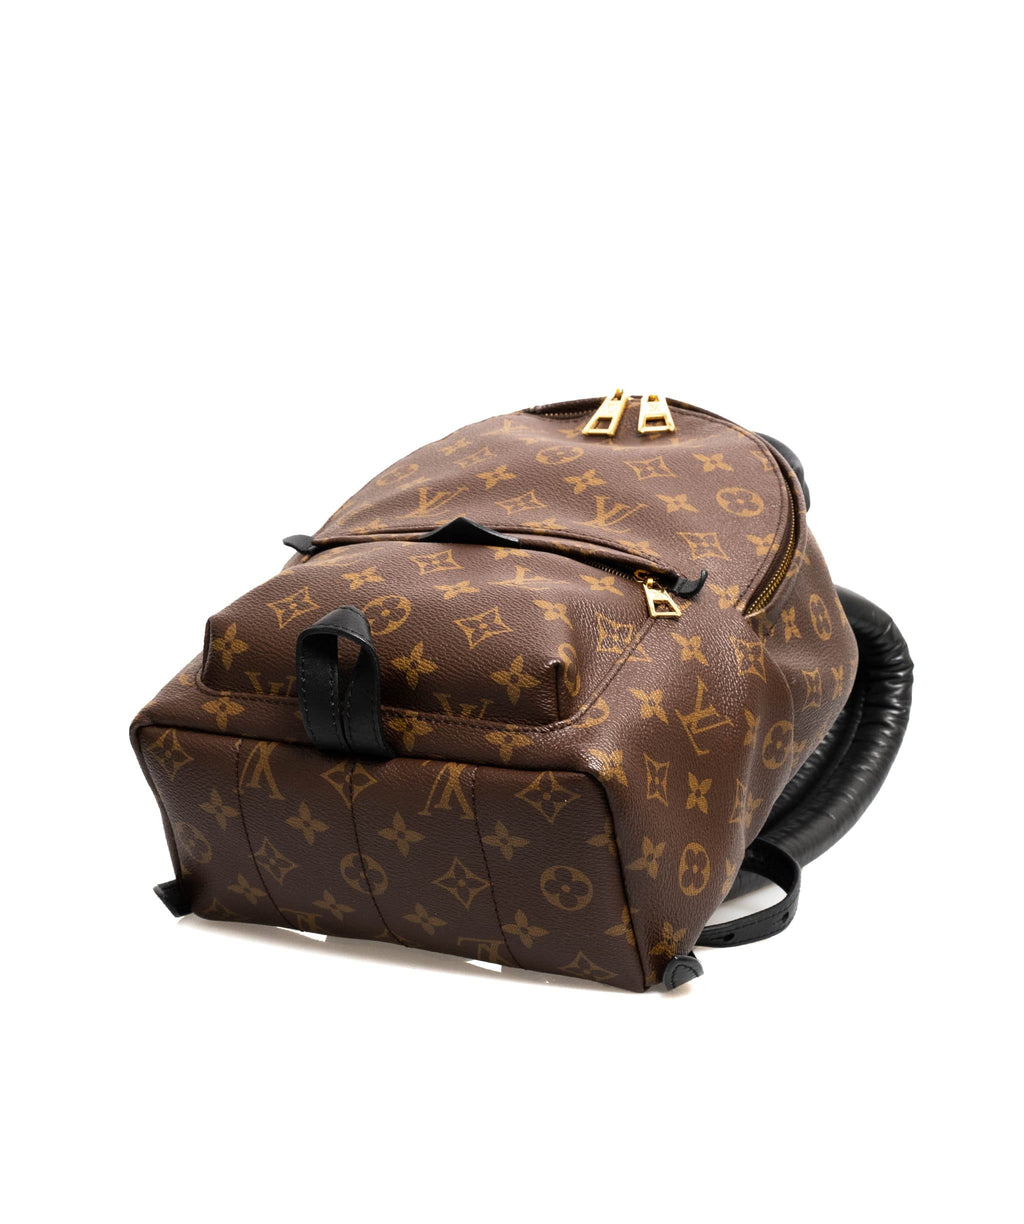 Louis Vuitton palm spring backpack – A Piece Lux